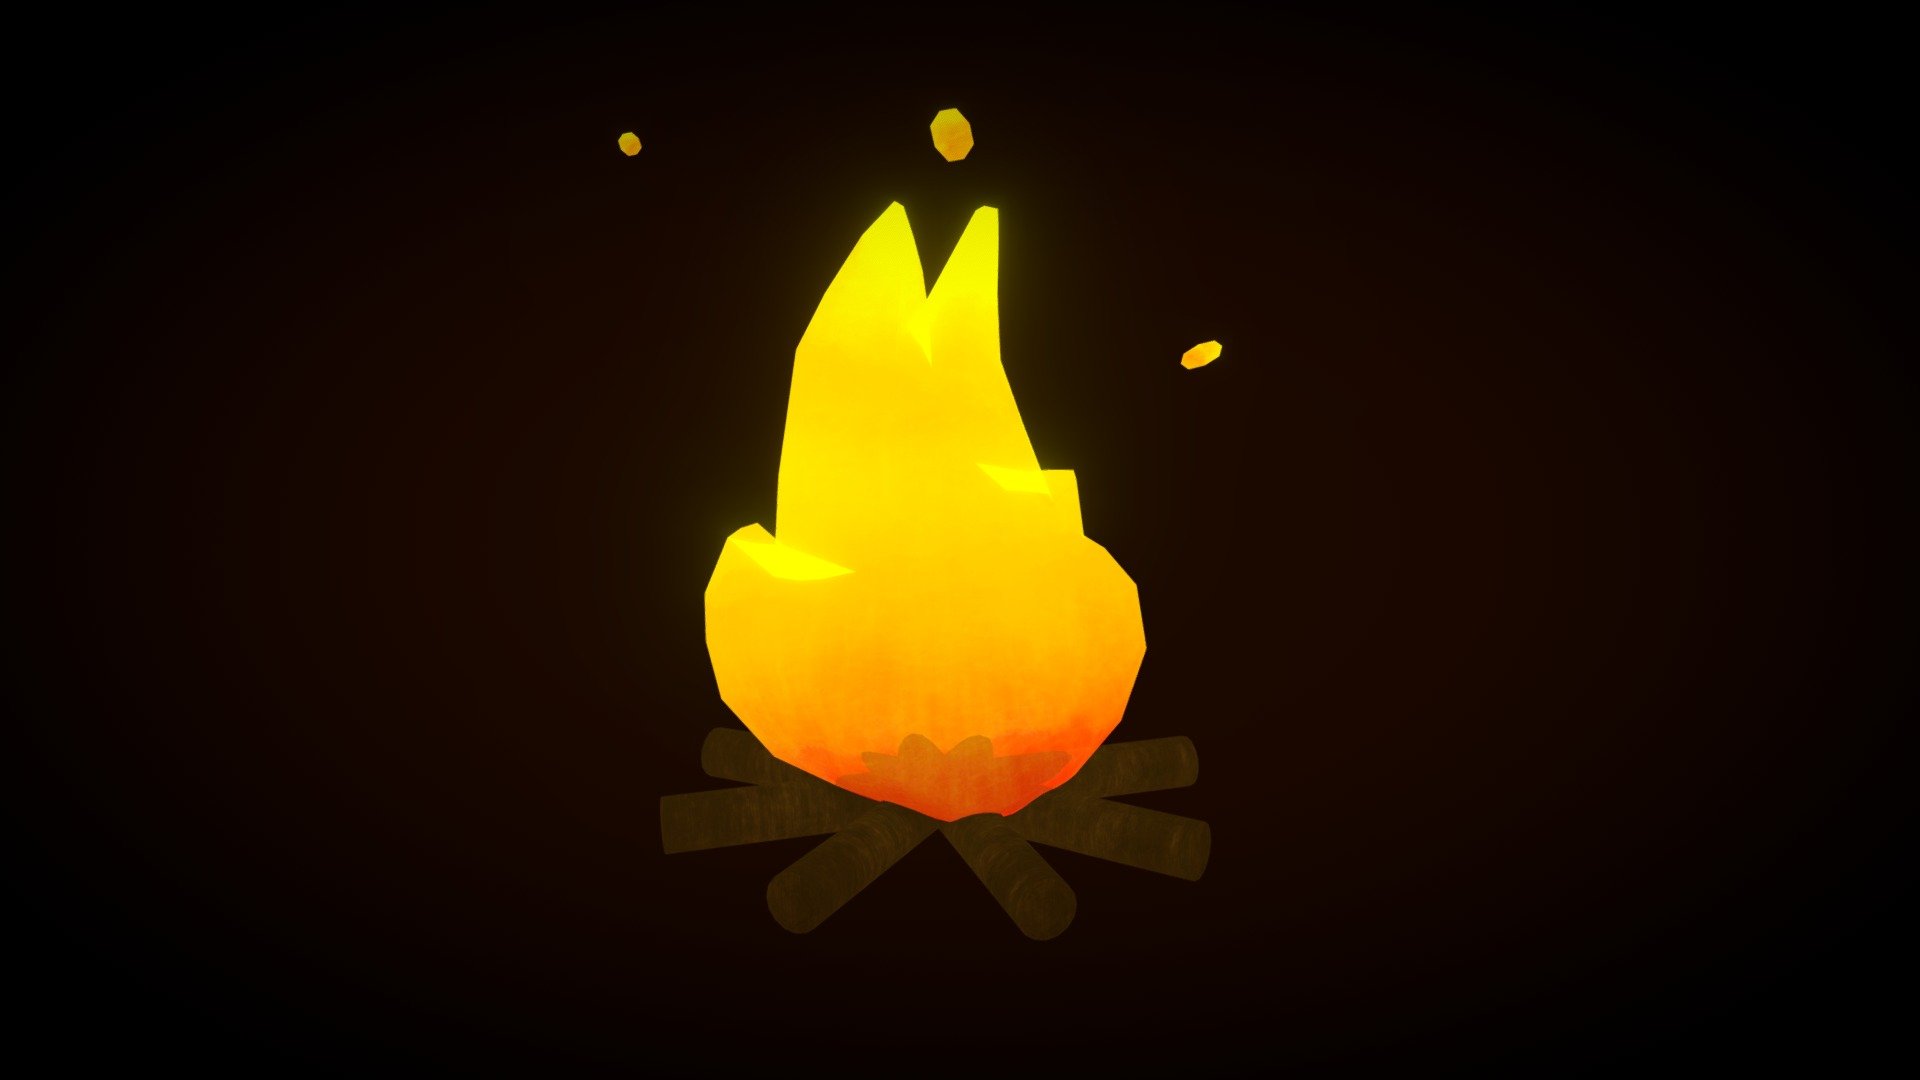 Hello, for todays project I wanted to play with no shading, stylized textures, and animations. I thought a campfire would be good to practice with and I really like how its comming together so far. Please feel free to leave me some feed back as this is my first really stalyzed piece 3d model